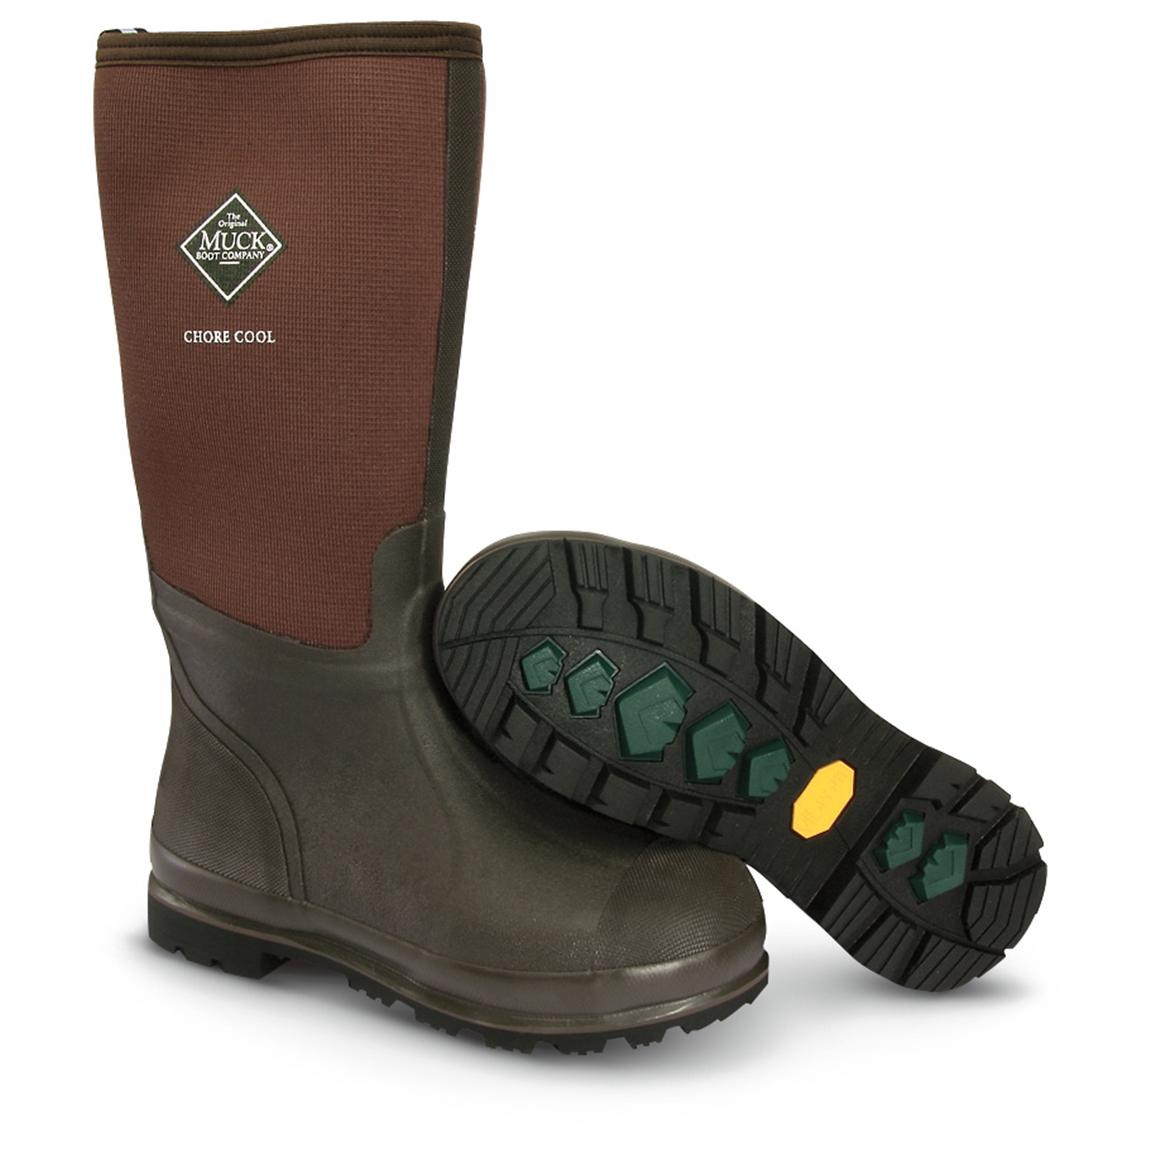 Men's Muck Boot Company Chore Cool High Work Boots, Brown - 294208 ...